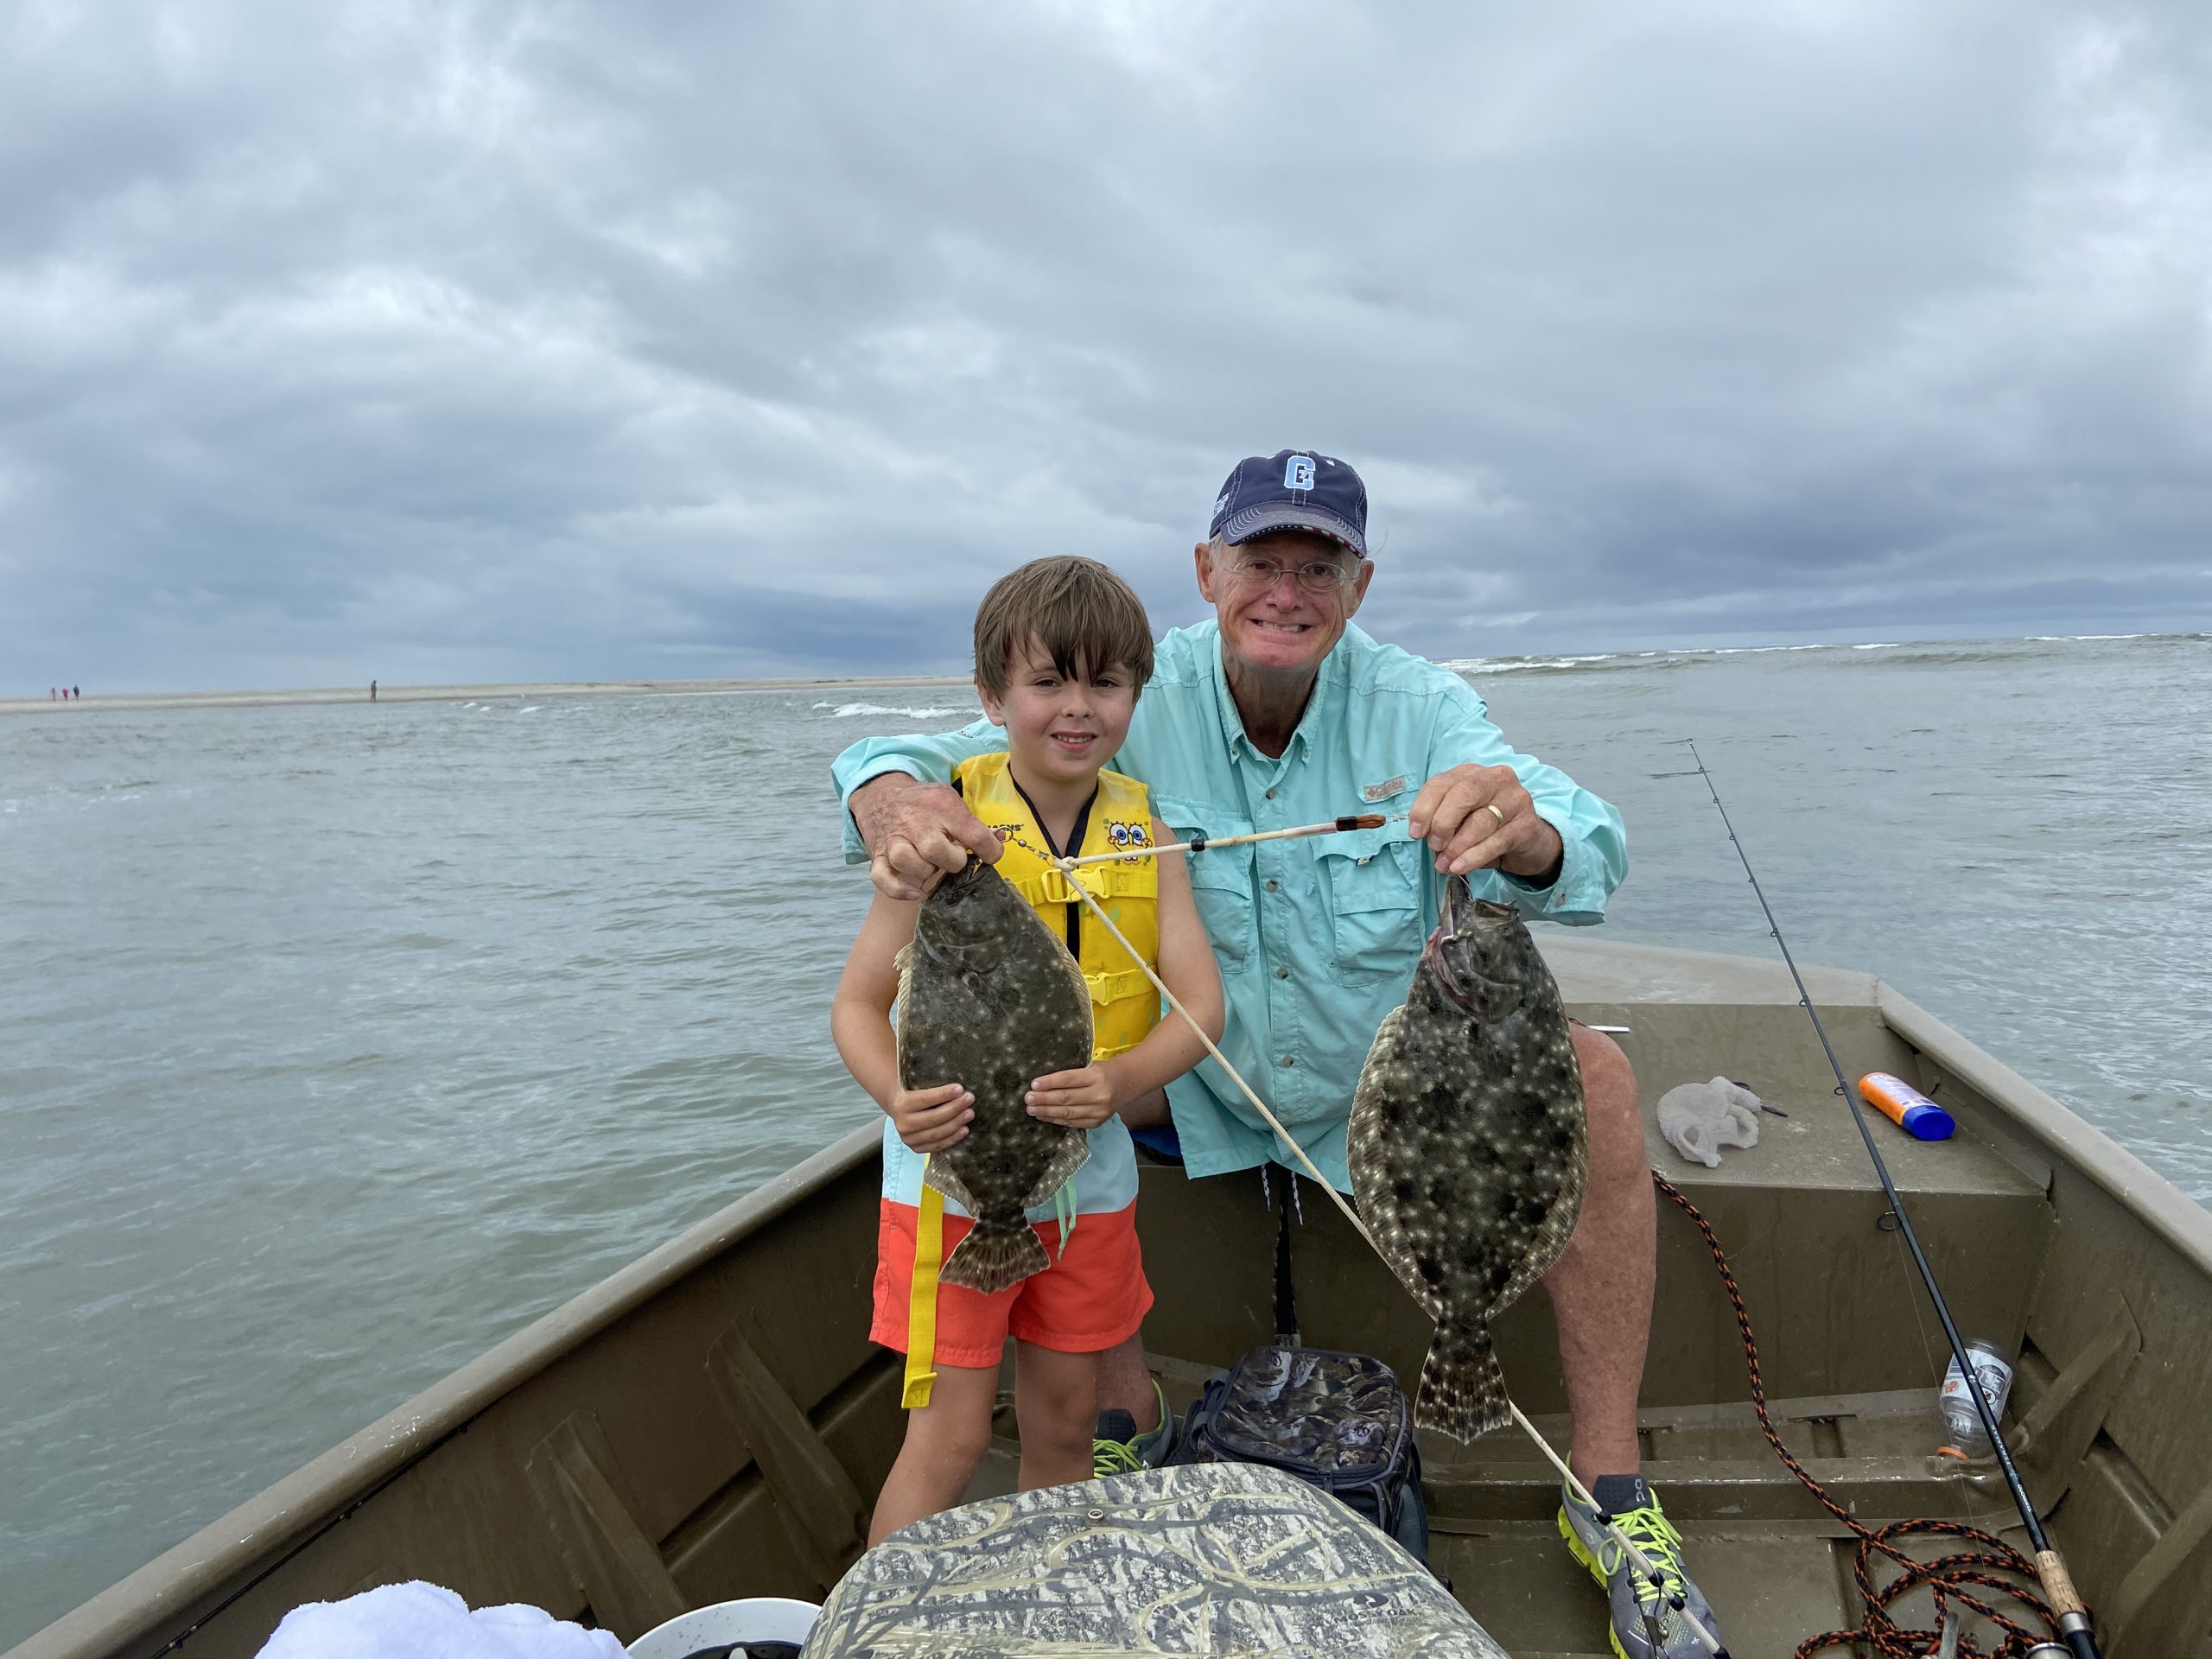 Claude’s son, Townsend, enjoys a flounder expedition at Pawleys Island with his grandfather, Bill Calloway.